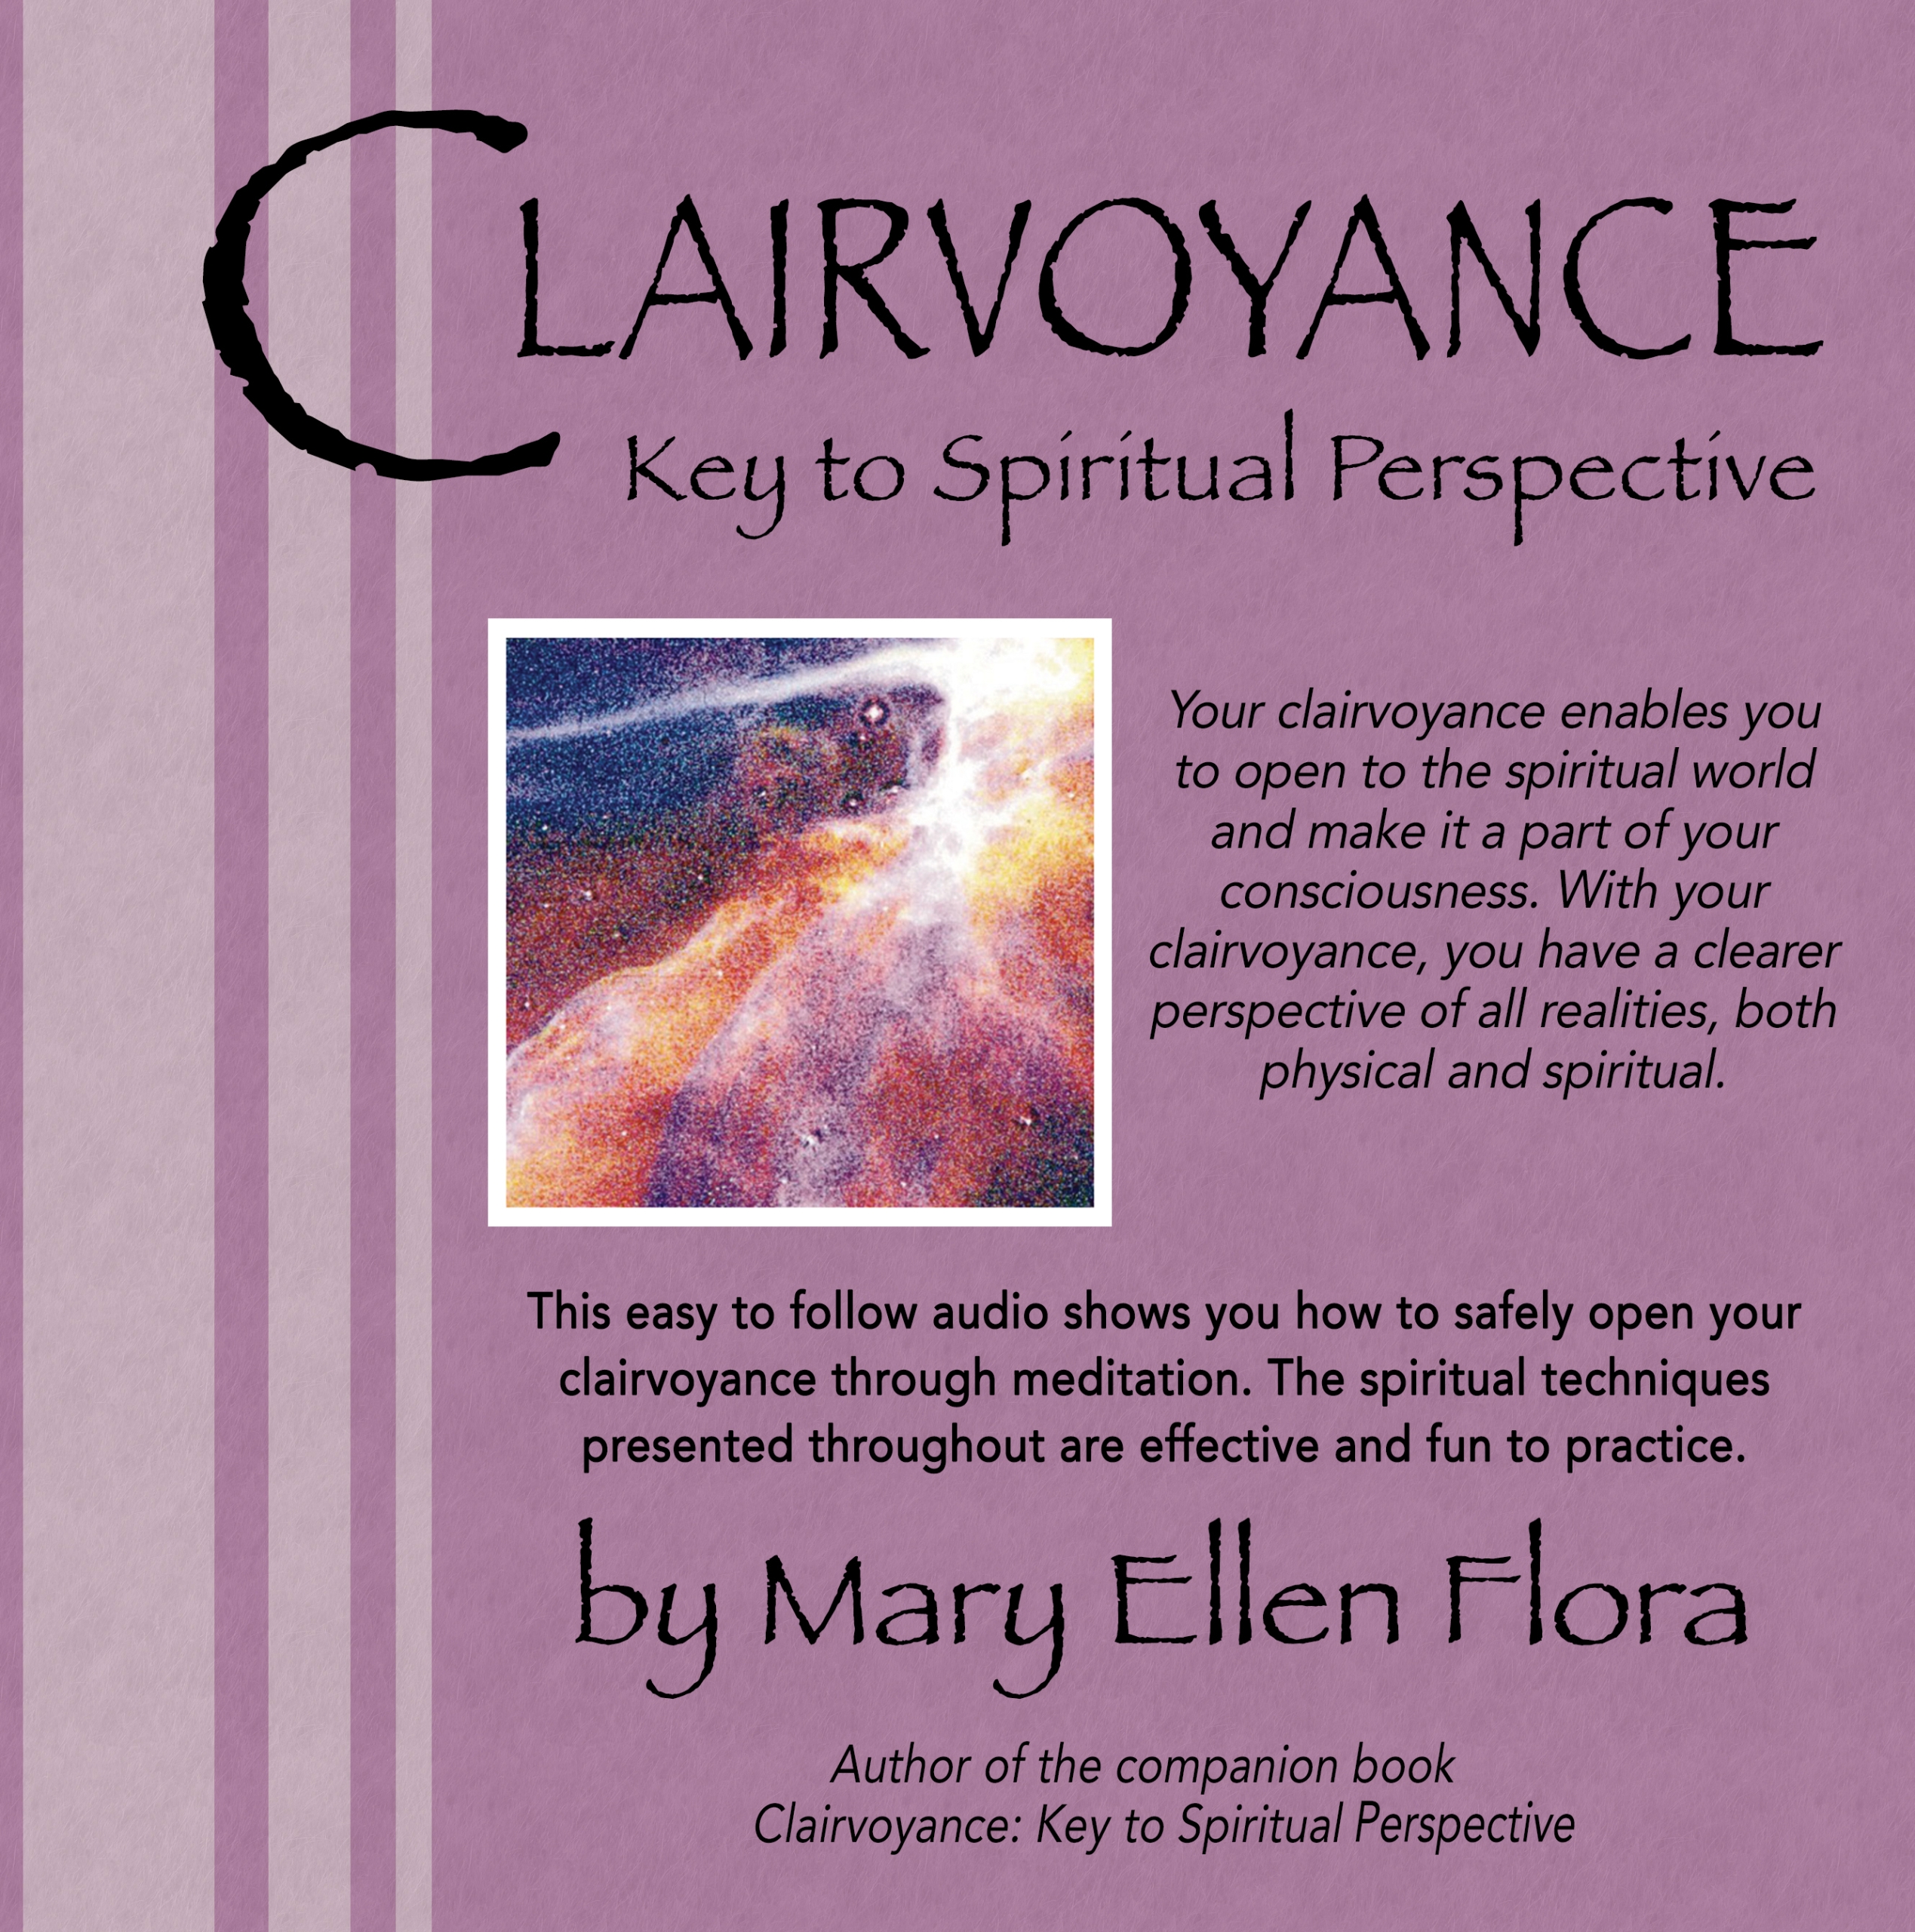 https://www.cdmspiritualcenter.org/wp-content/uploads/Clairvoyance-Cover-scaled.jpg